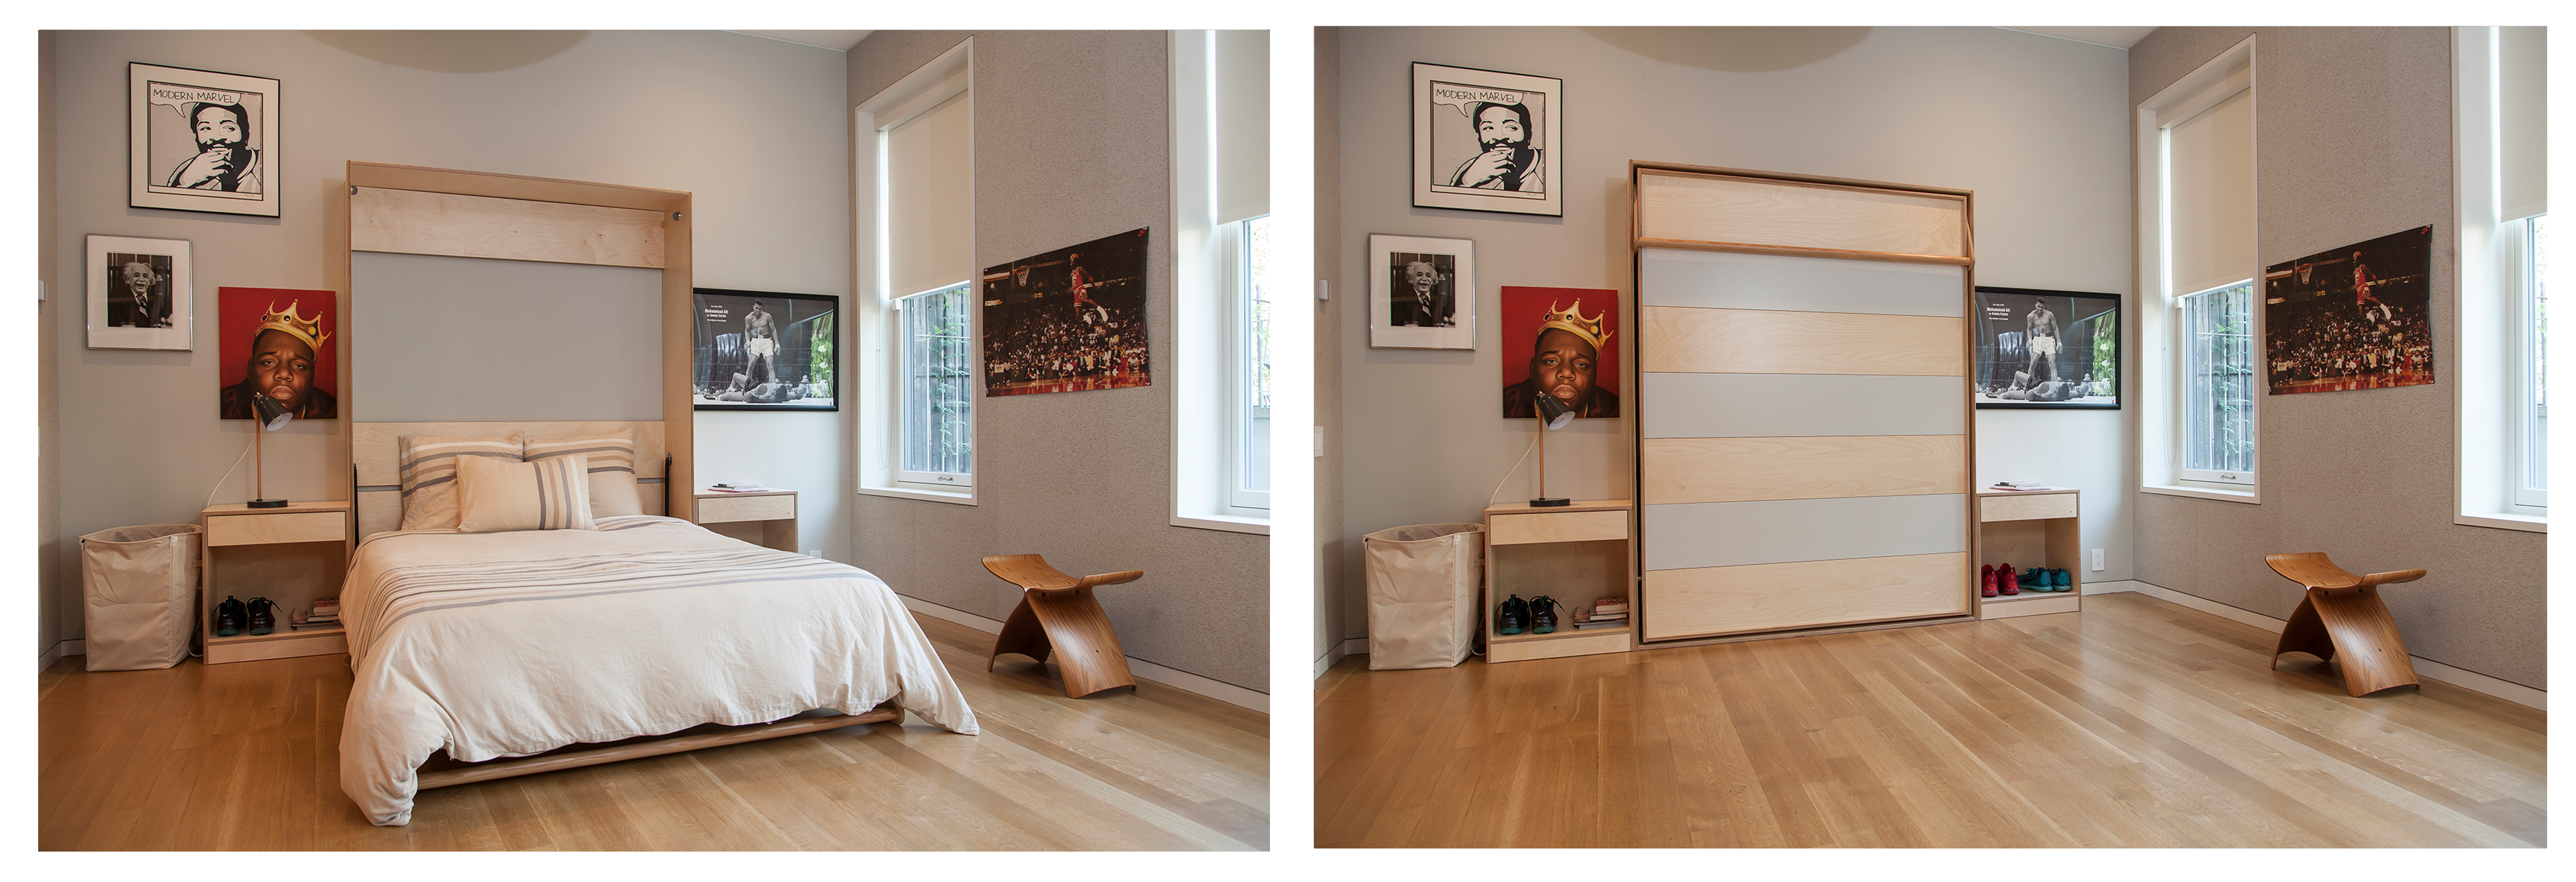 Split image showing a murphy bed down as a full bed and folded up, in a room with artistic decor.